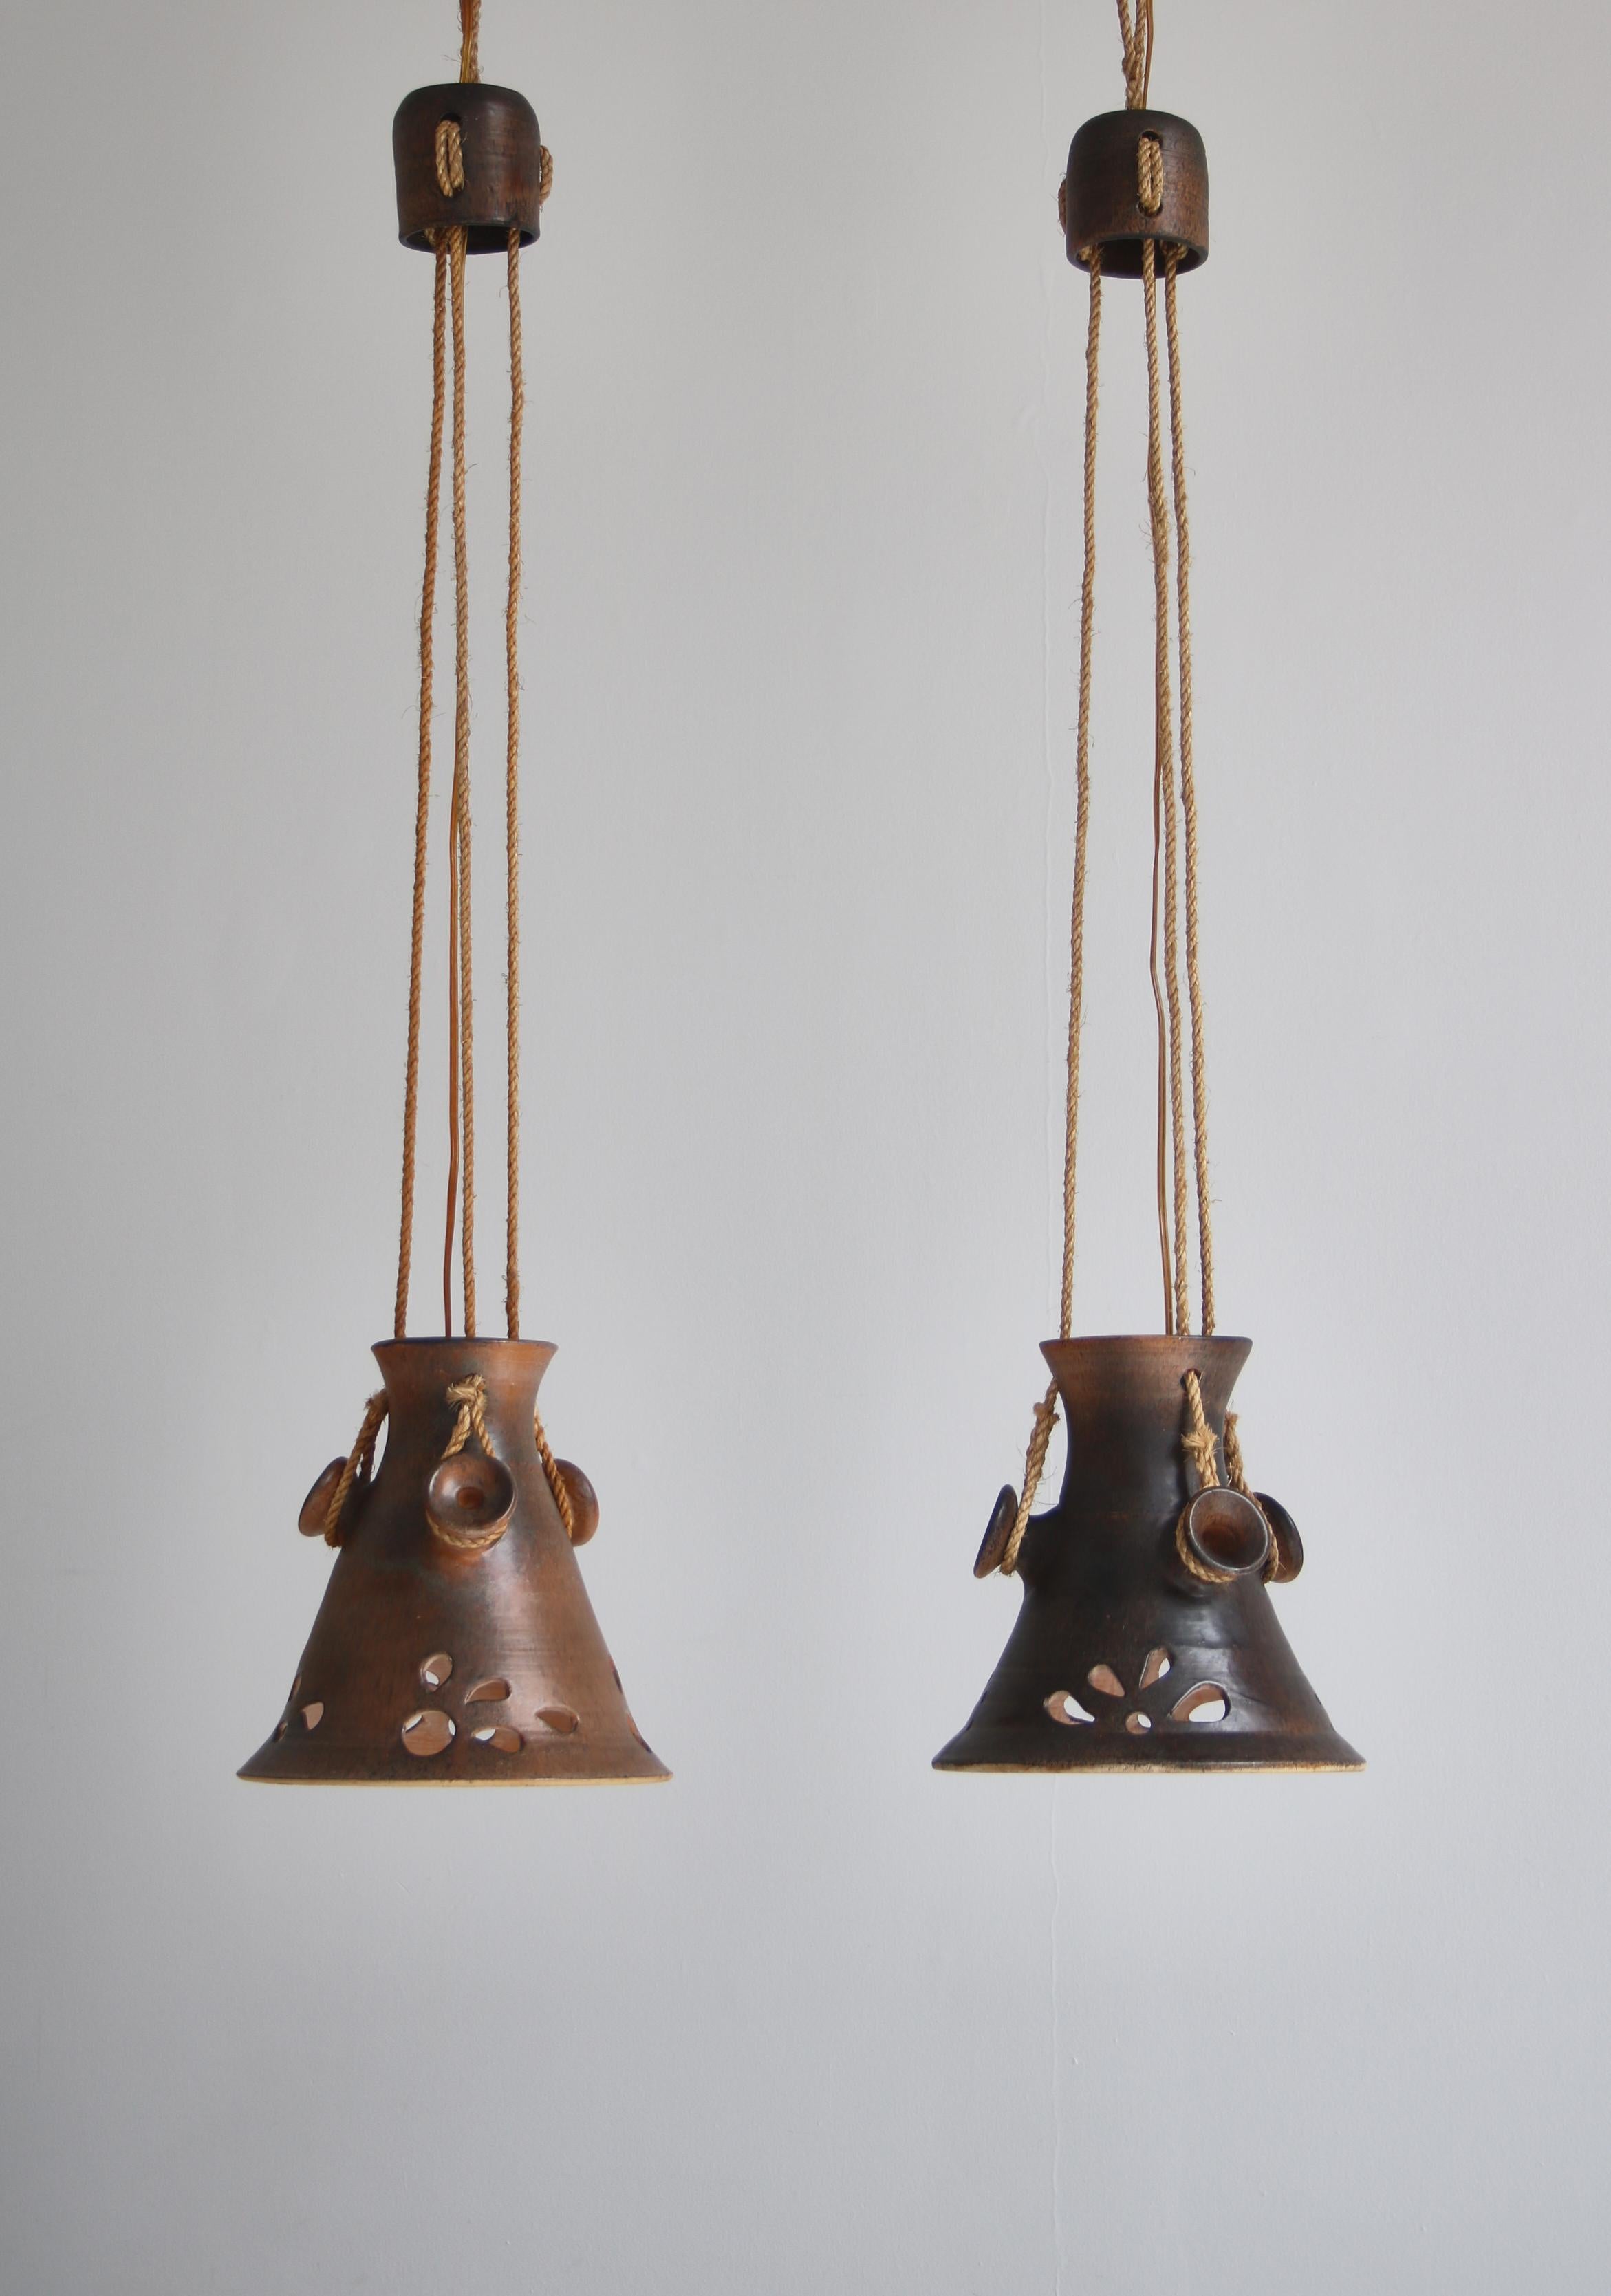 Scandinavian Modern Ceramics Pendants in Earth Colored Glazing, 1960s, Denmark In Good Condition For Sale In Odense, DK